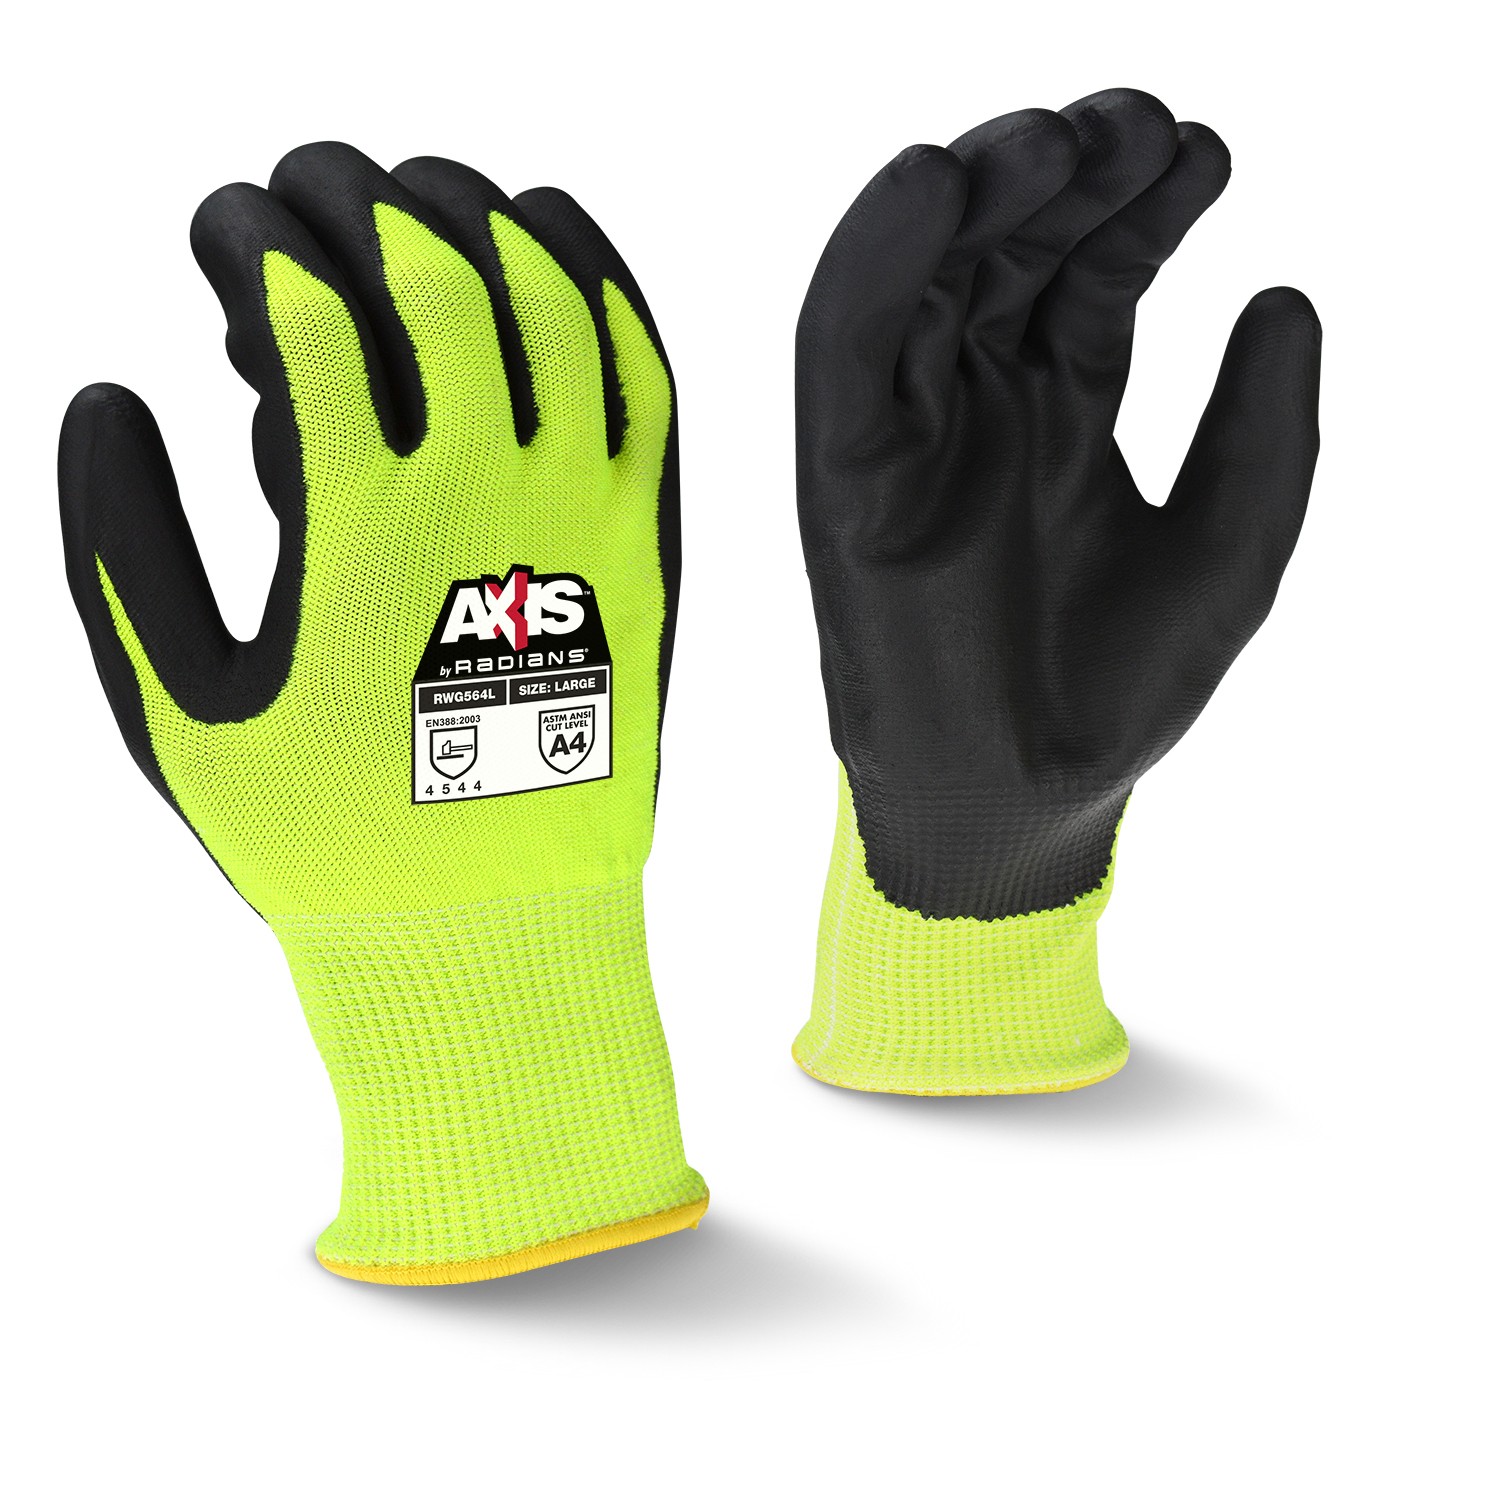 AXIS™ Cut Protection Level A4 Work Glove (#RWG564)